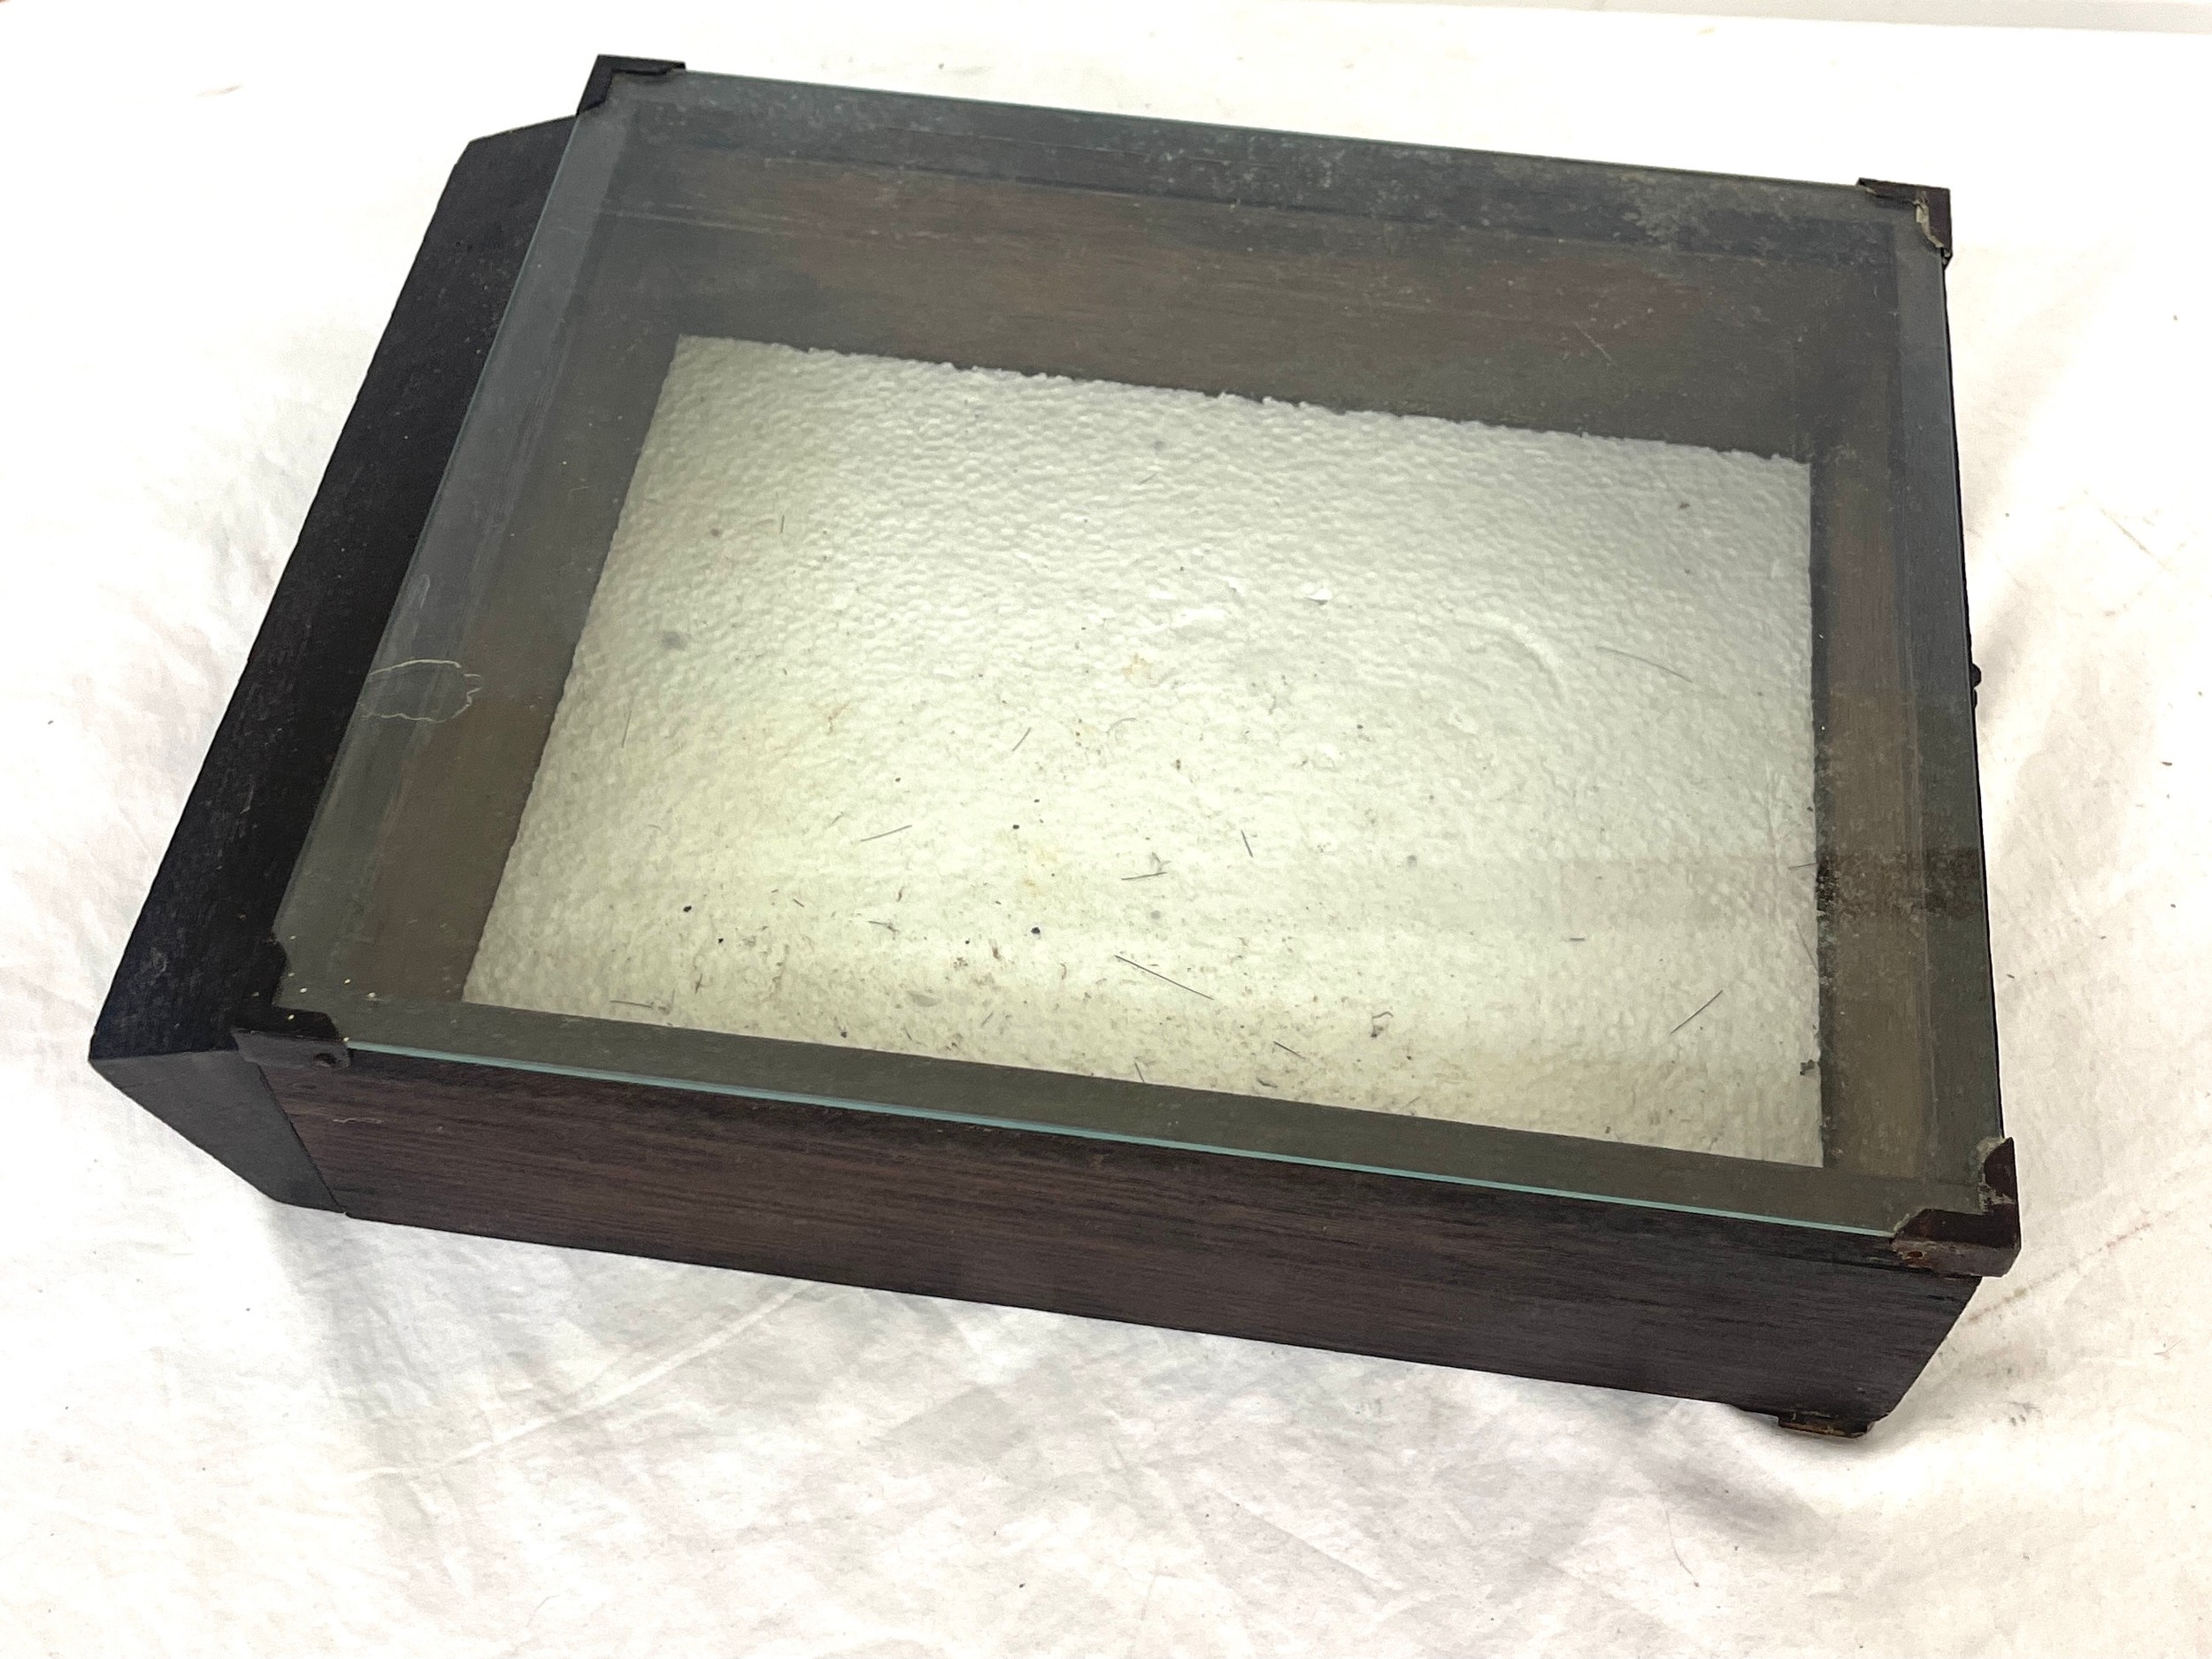 Small vintage cube display case / box, approximate measurements: Width 14 inches, Height 10.5